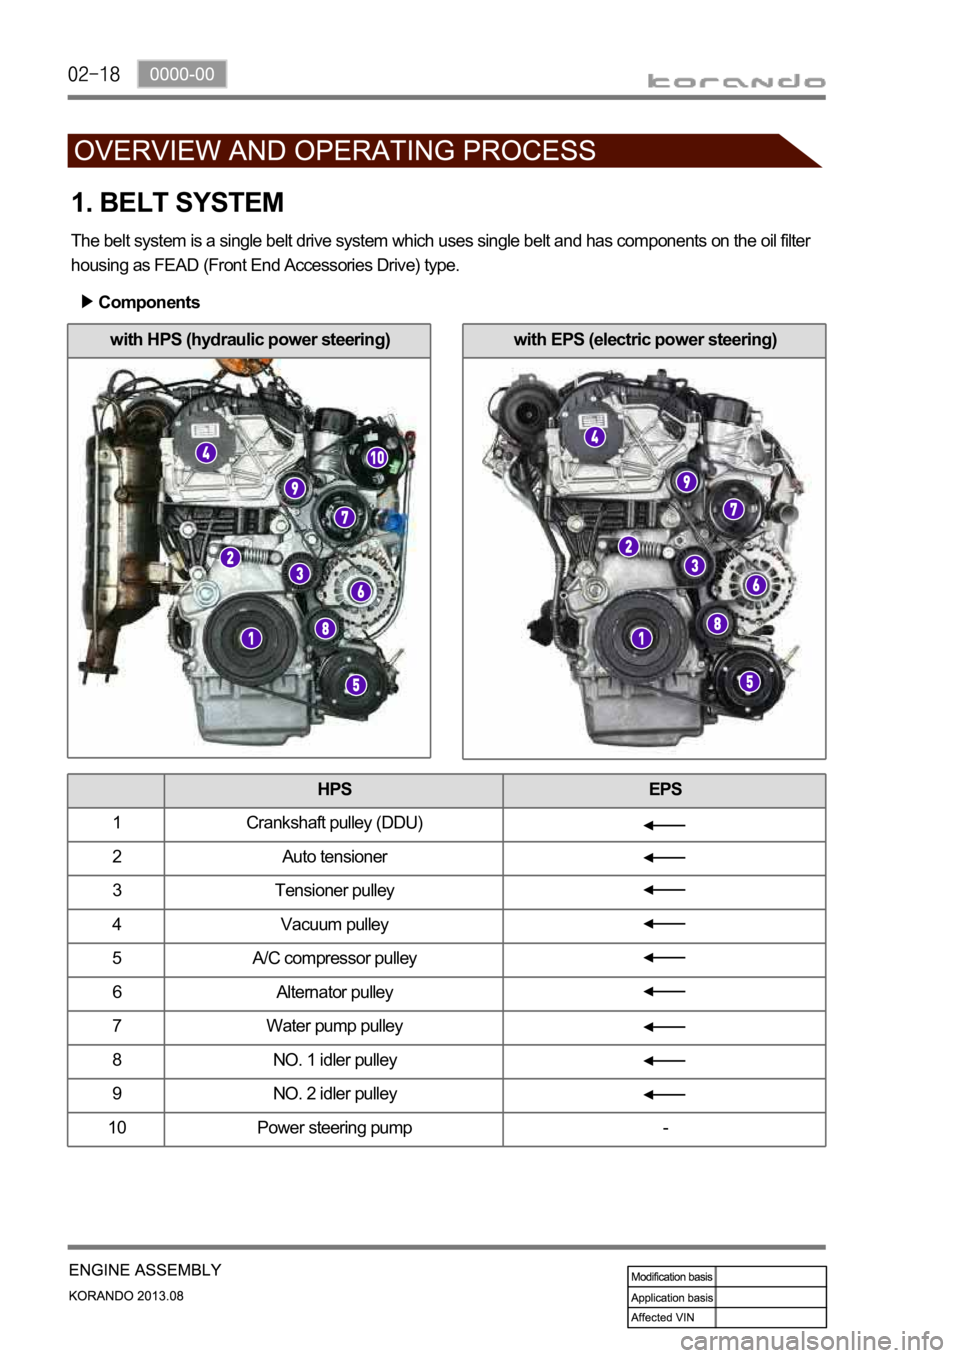 SSANGYONG KORANDO 2013  Service Manual with EPS (electric power steering)with HPS (hydraulic power steering)
1. BELT SYSTEM
The belt system is a single belt drive system which uses single belt and has components on the oil filter 
housing 